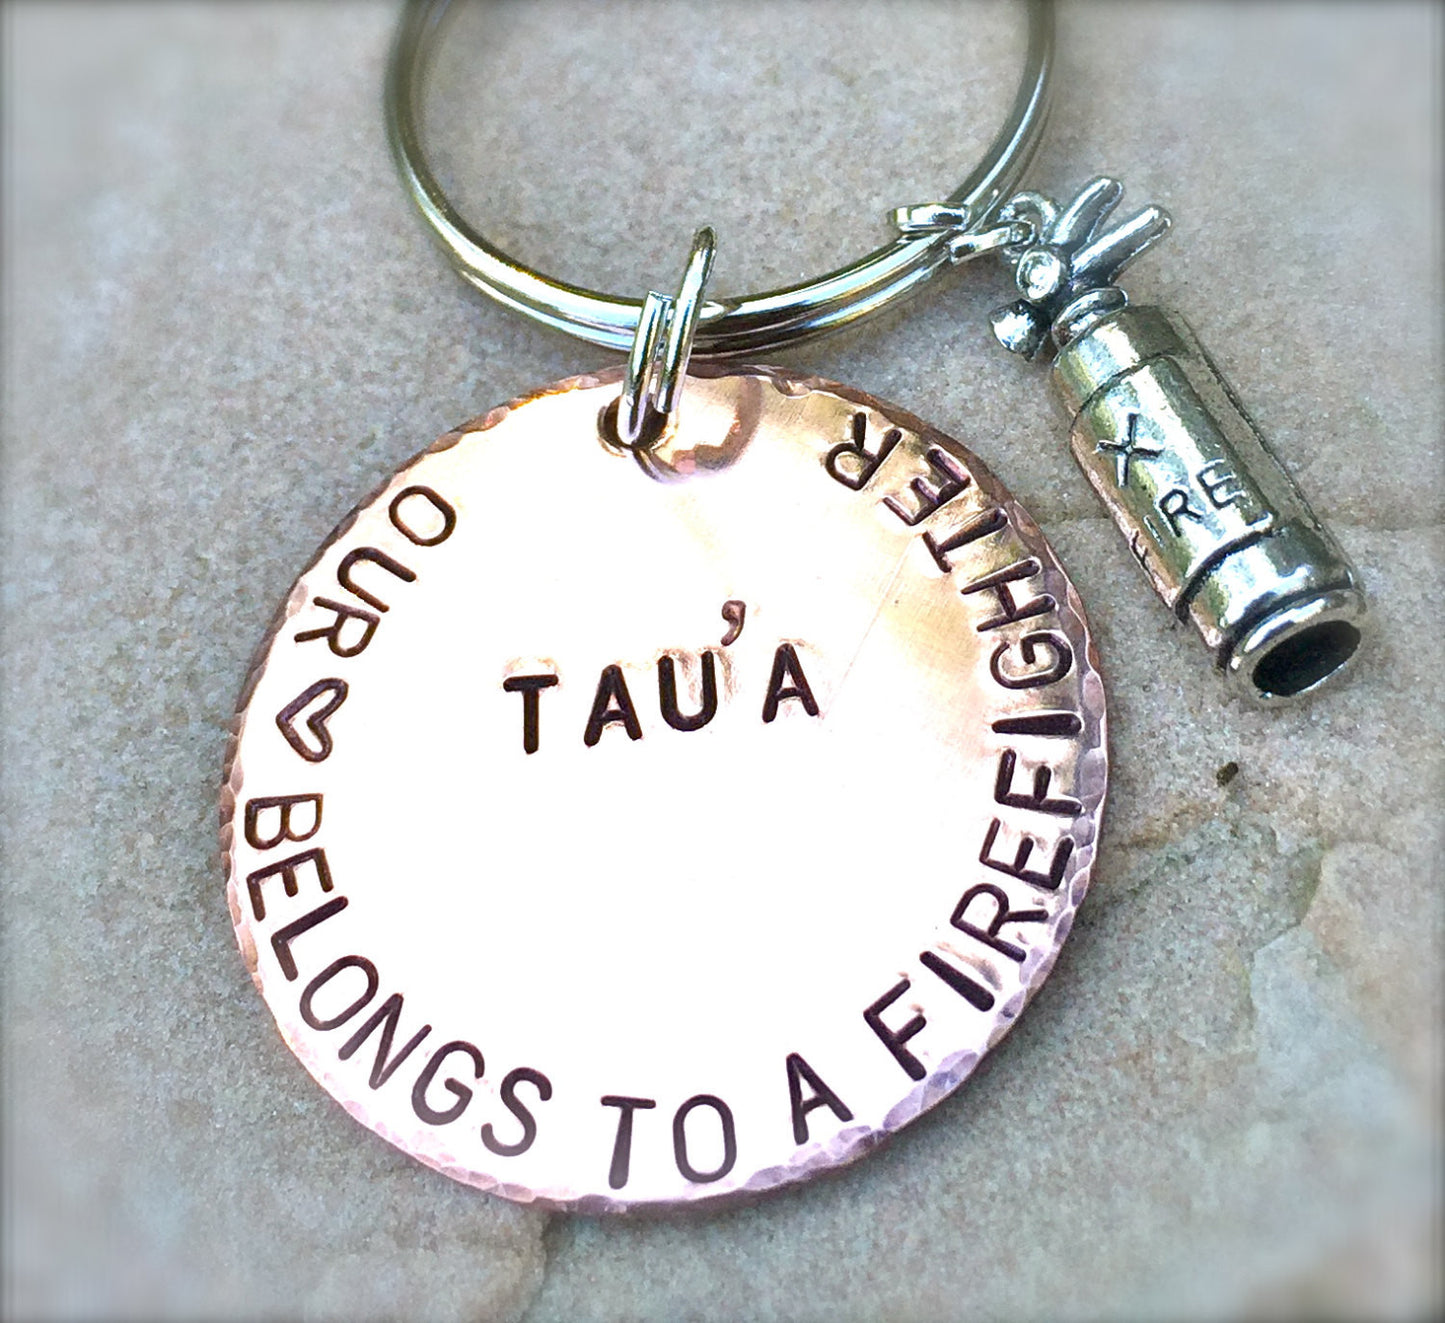 Custom Firefighter Keychain - Natashaaloha, jewelry, bracelets, necklace, keychains, fishing lures, gifts for men, charms, personalized, 